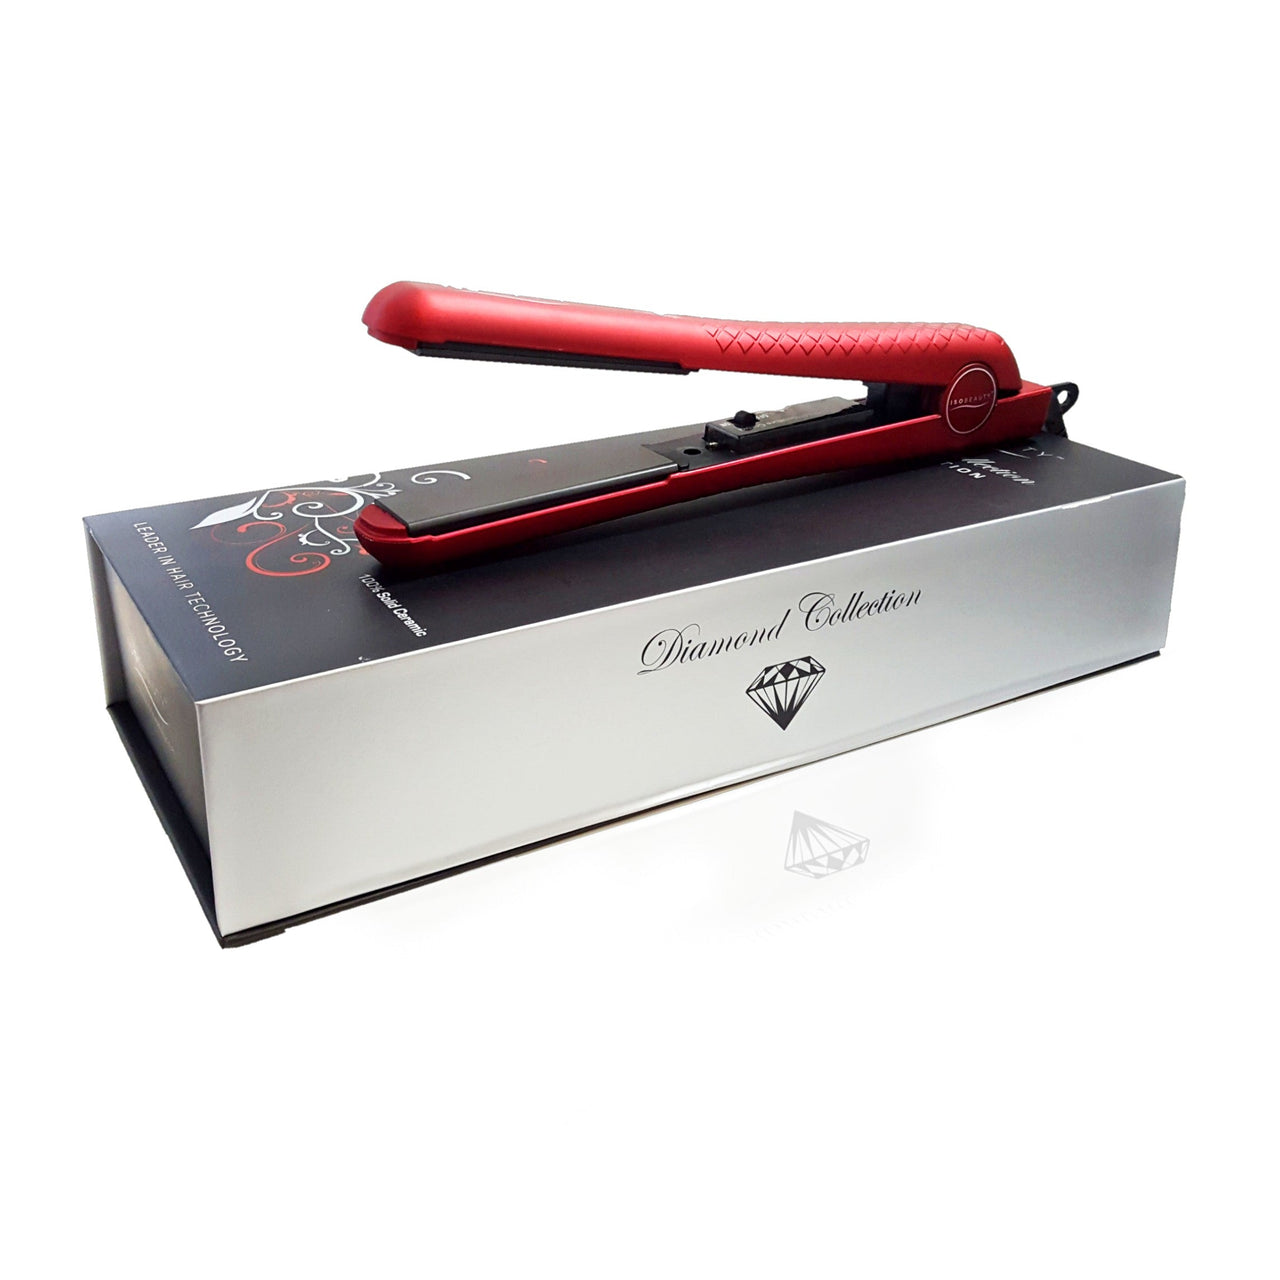 Soft Touch 1.25" Ceramic Plates Flat Iron Straightener with Adjustable Temperature Metallic Red